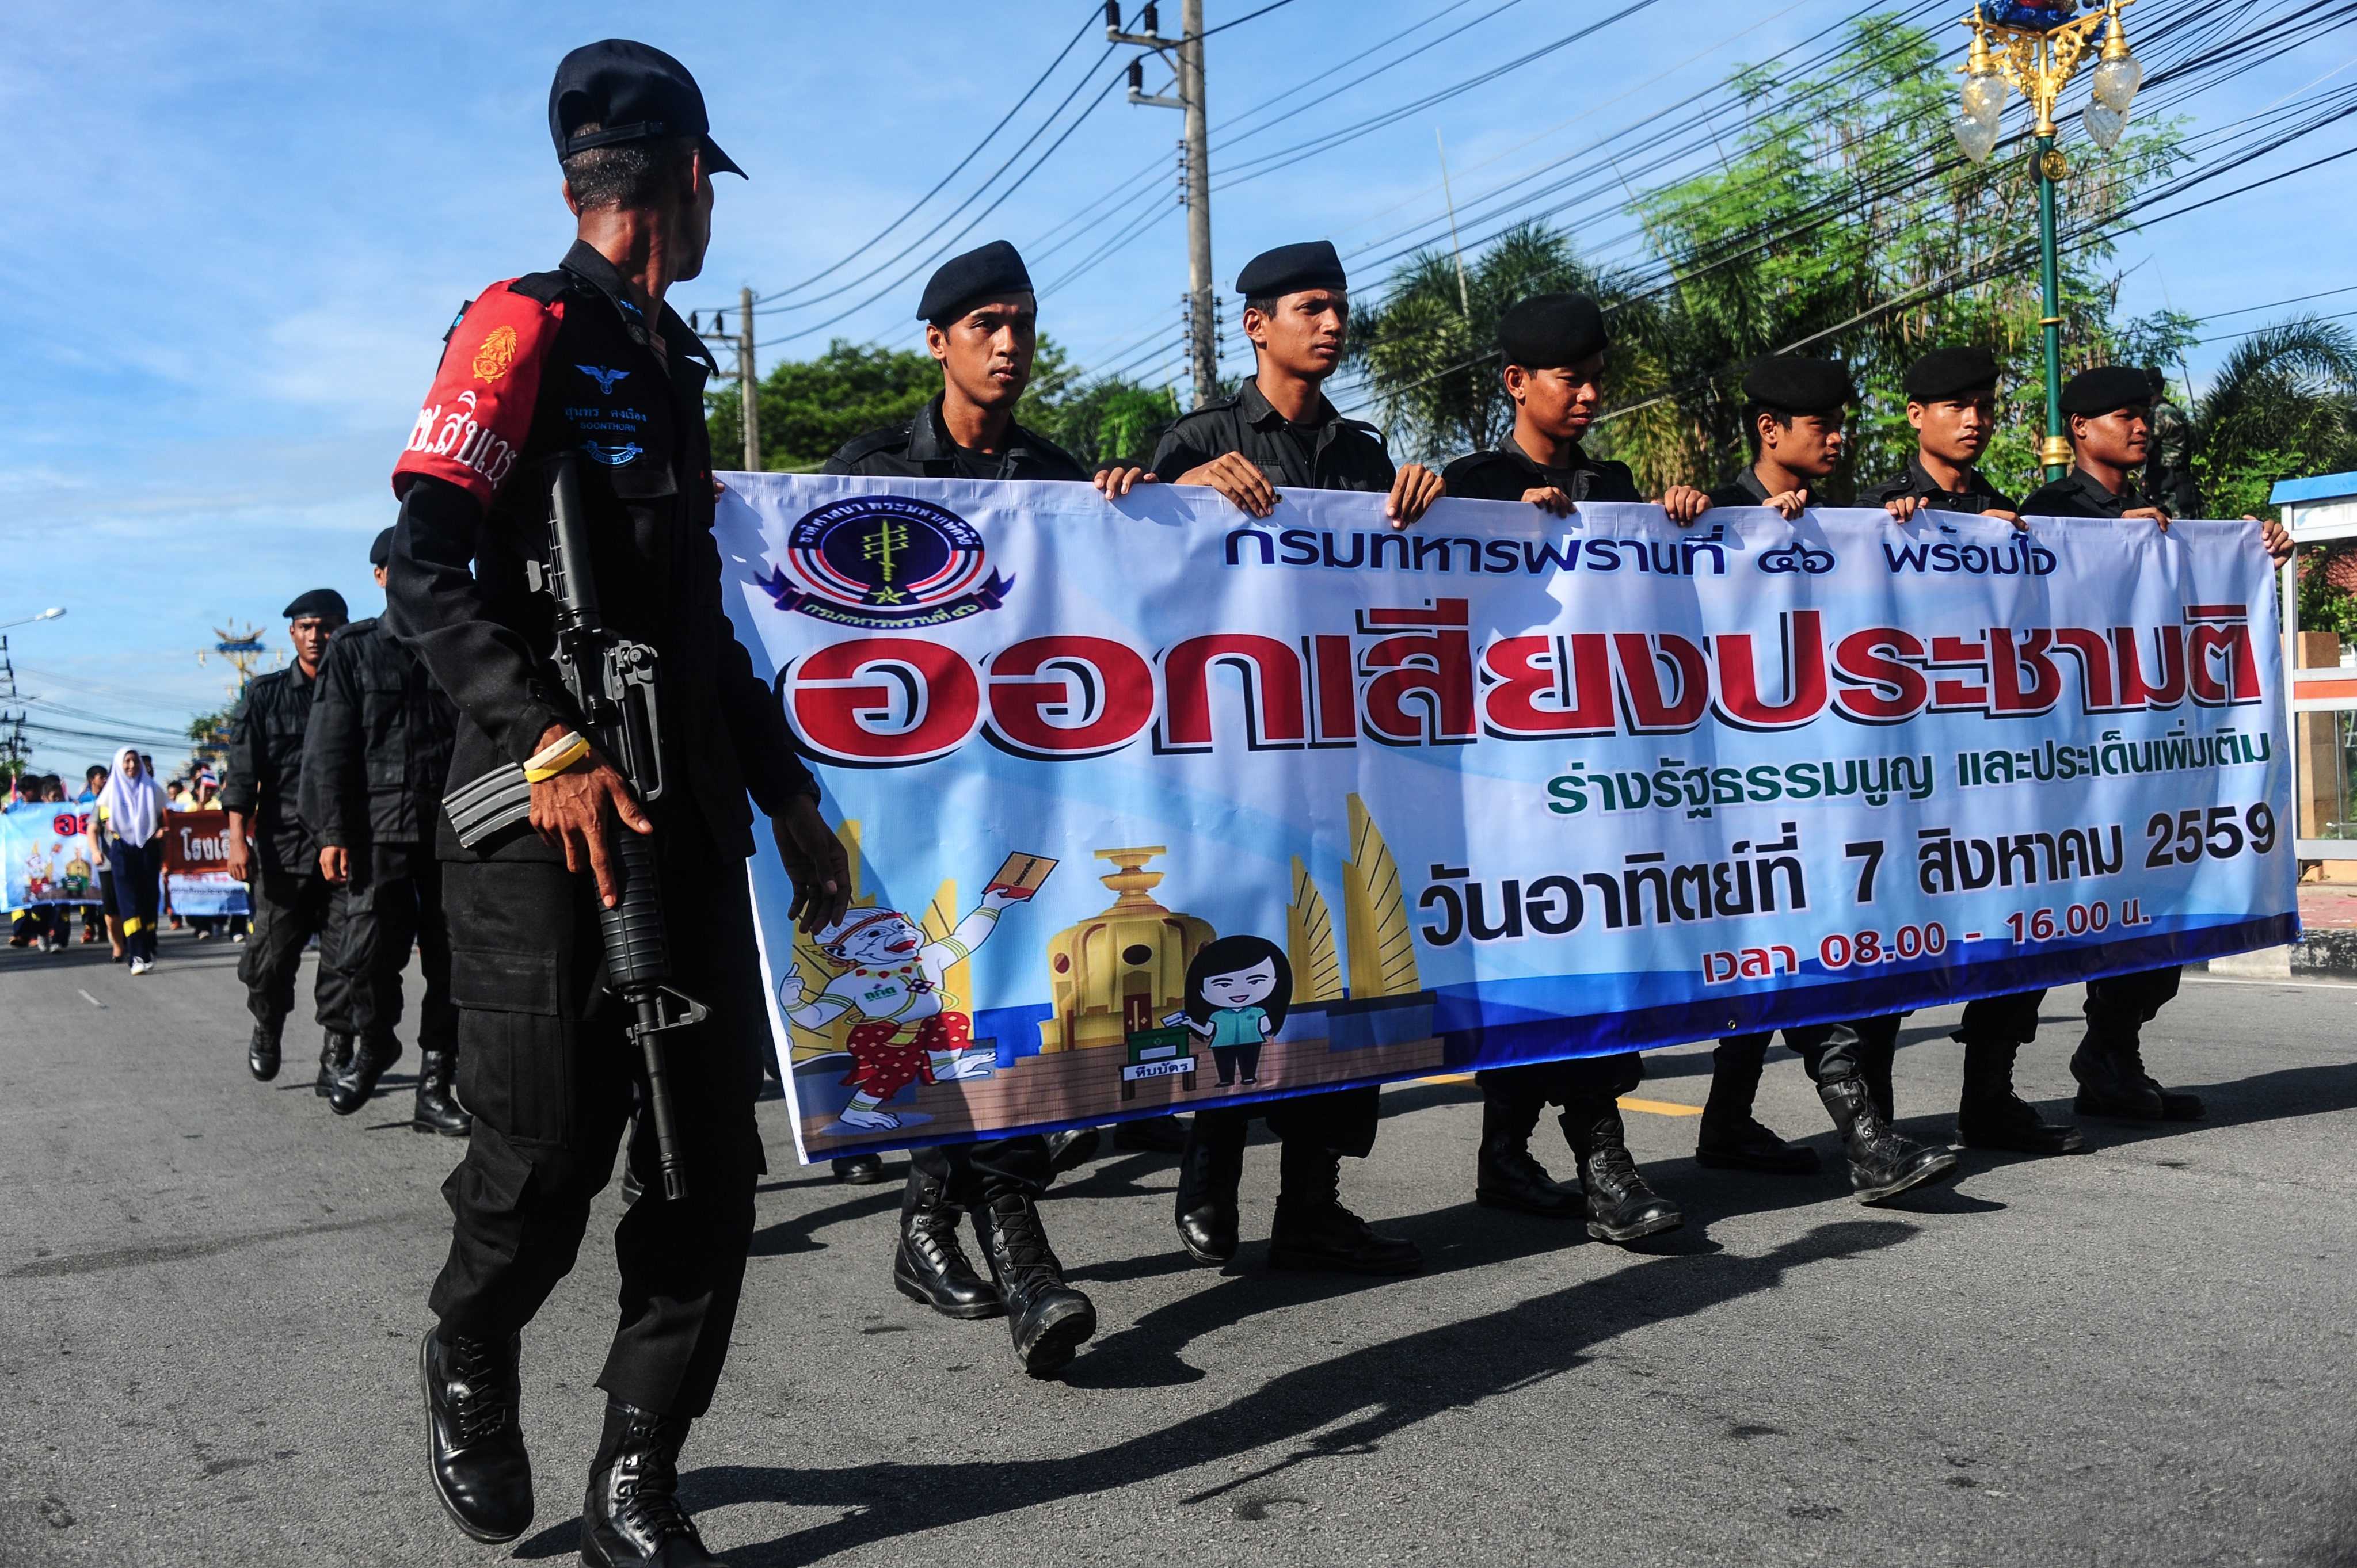 Soldiers hold banners as they march during a campaign encouraging the public to vote in the upcoming referendum on Thailand's draft constitution in Narathiwat province on July 22, 2016. (Madaree Tohlala—AFP/Getty Images)